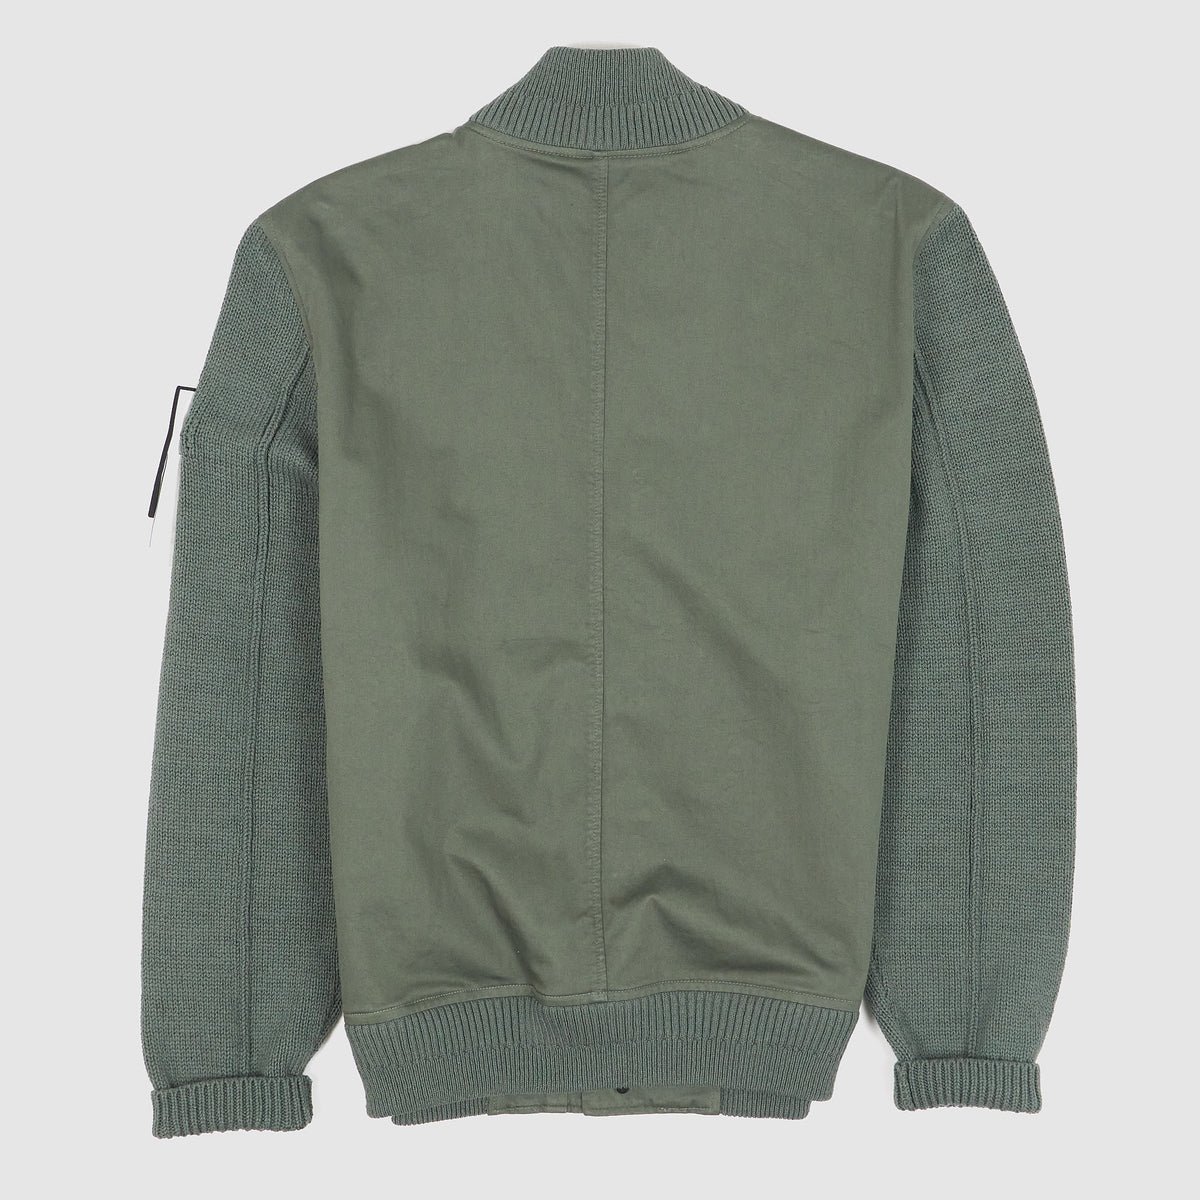 Stone Island Bomber Jacket w/ Knitted Sleeves Light Cover-TC